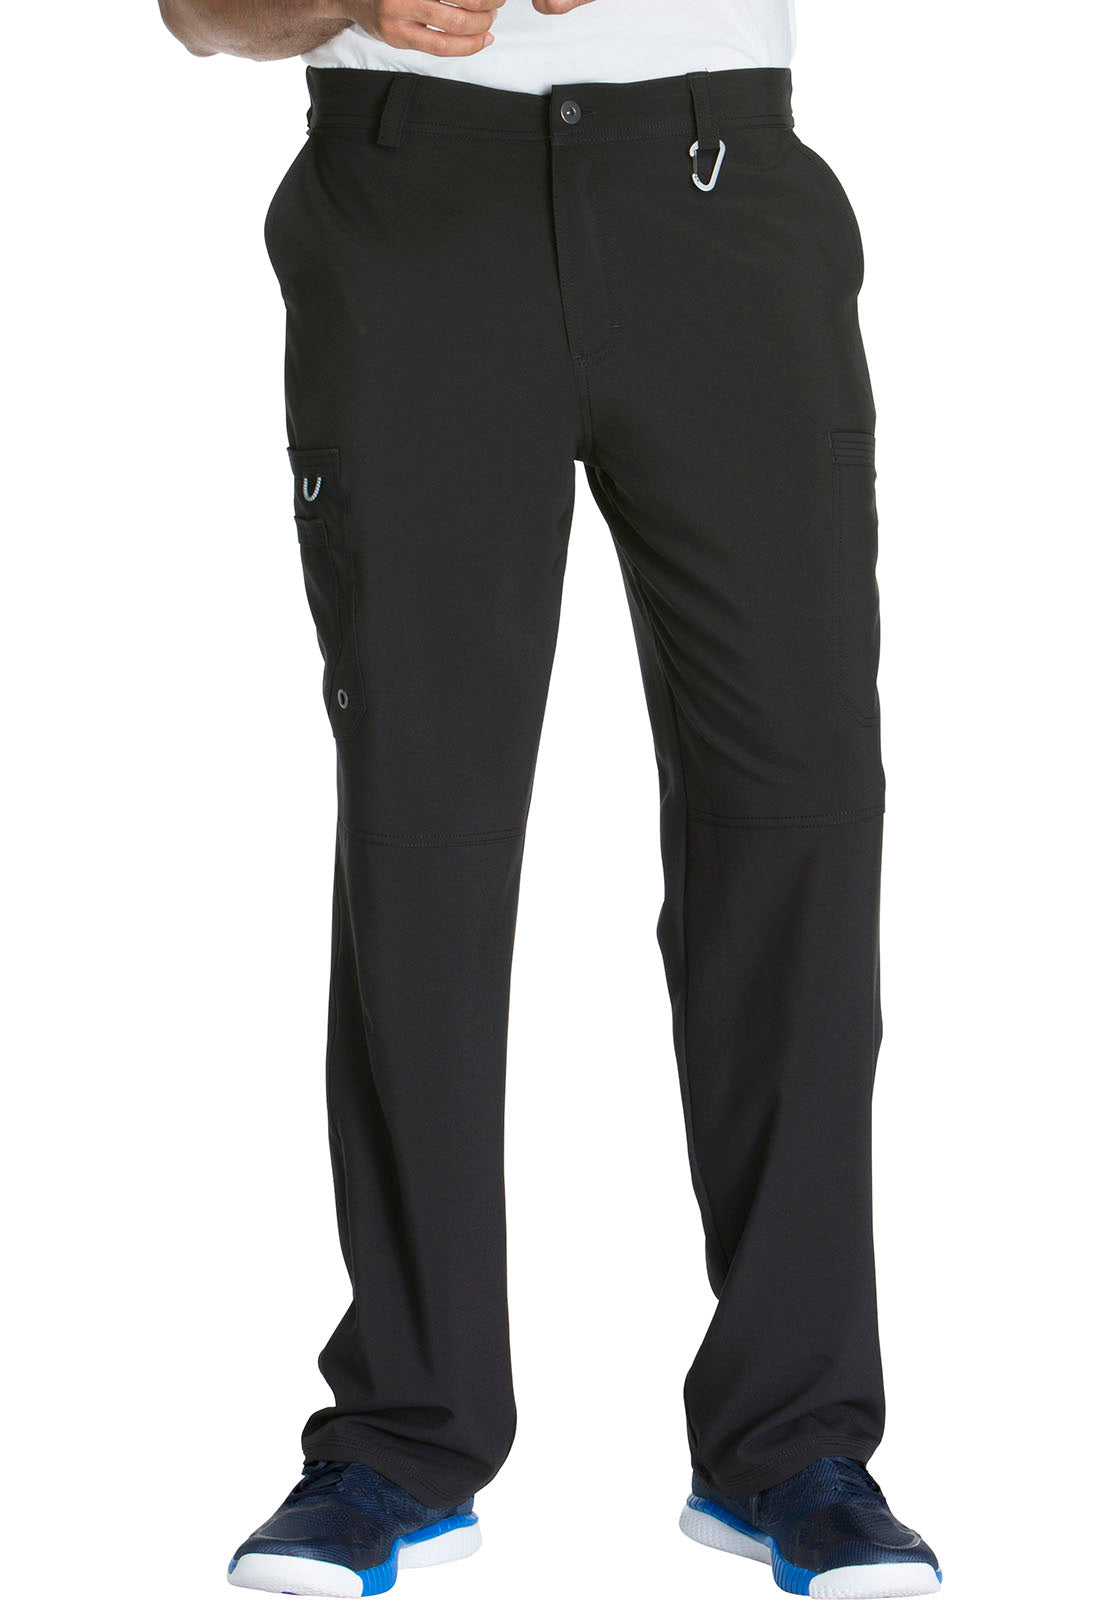 CK200A - Men's Infinity Fly Front Pant